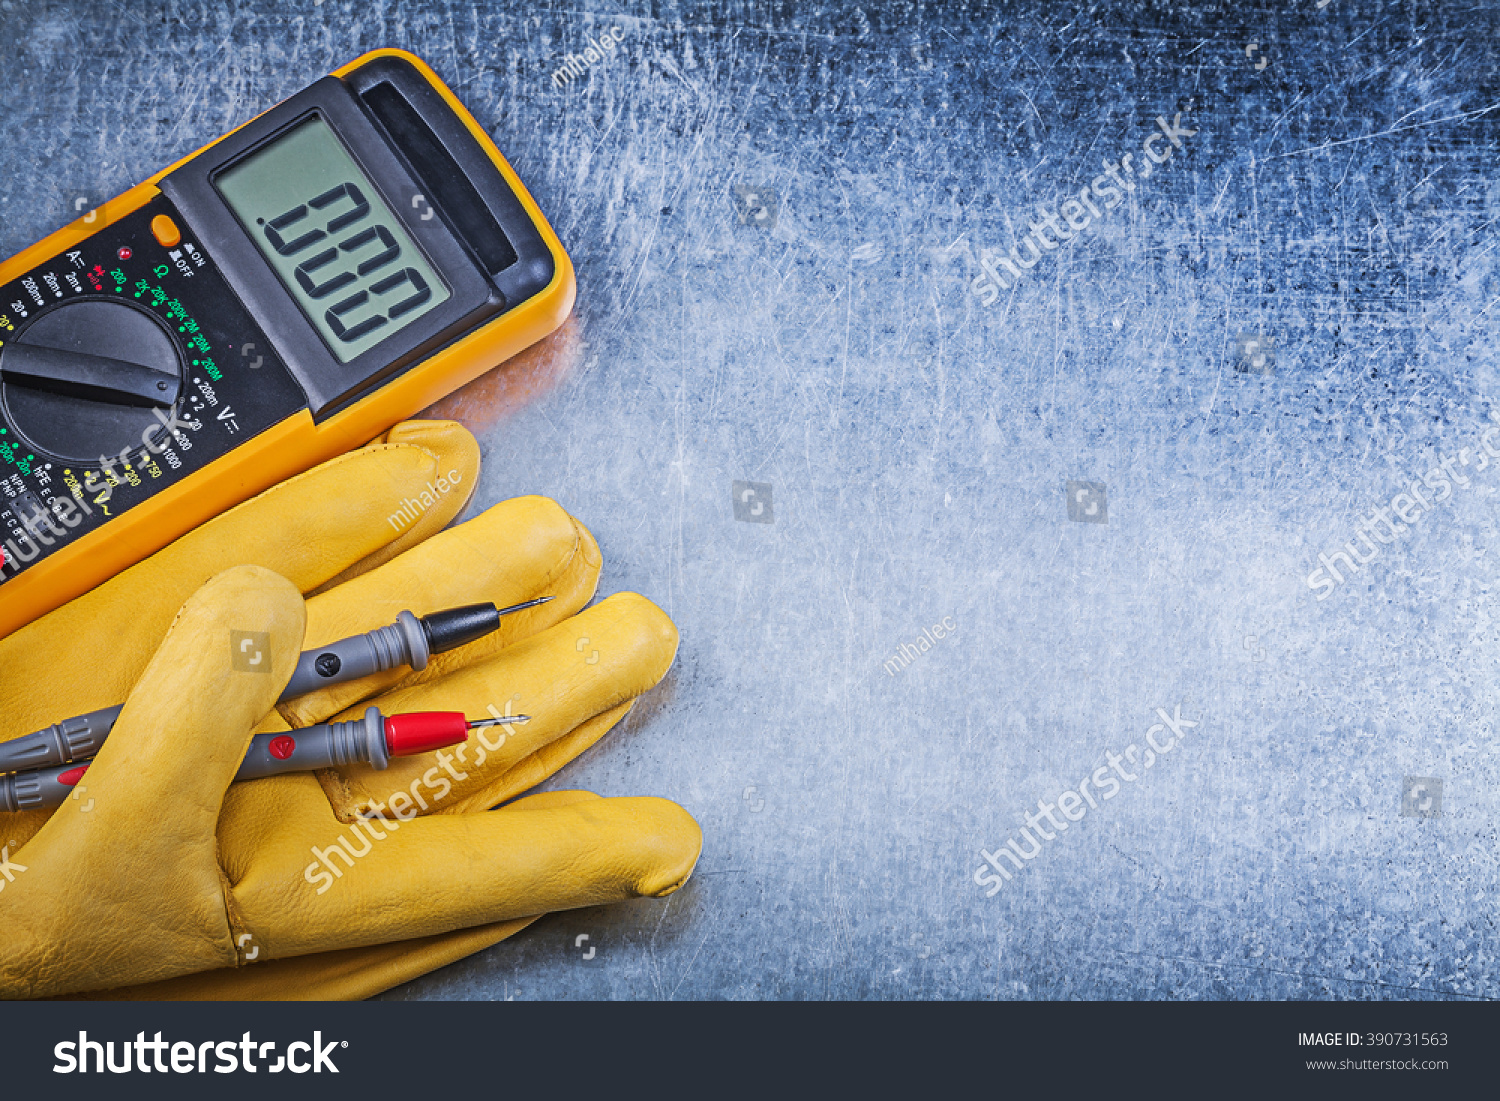 Digital electric tester safety gloves on metallic background electricity concept. #390731563